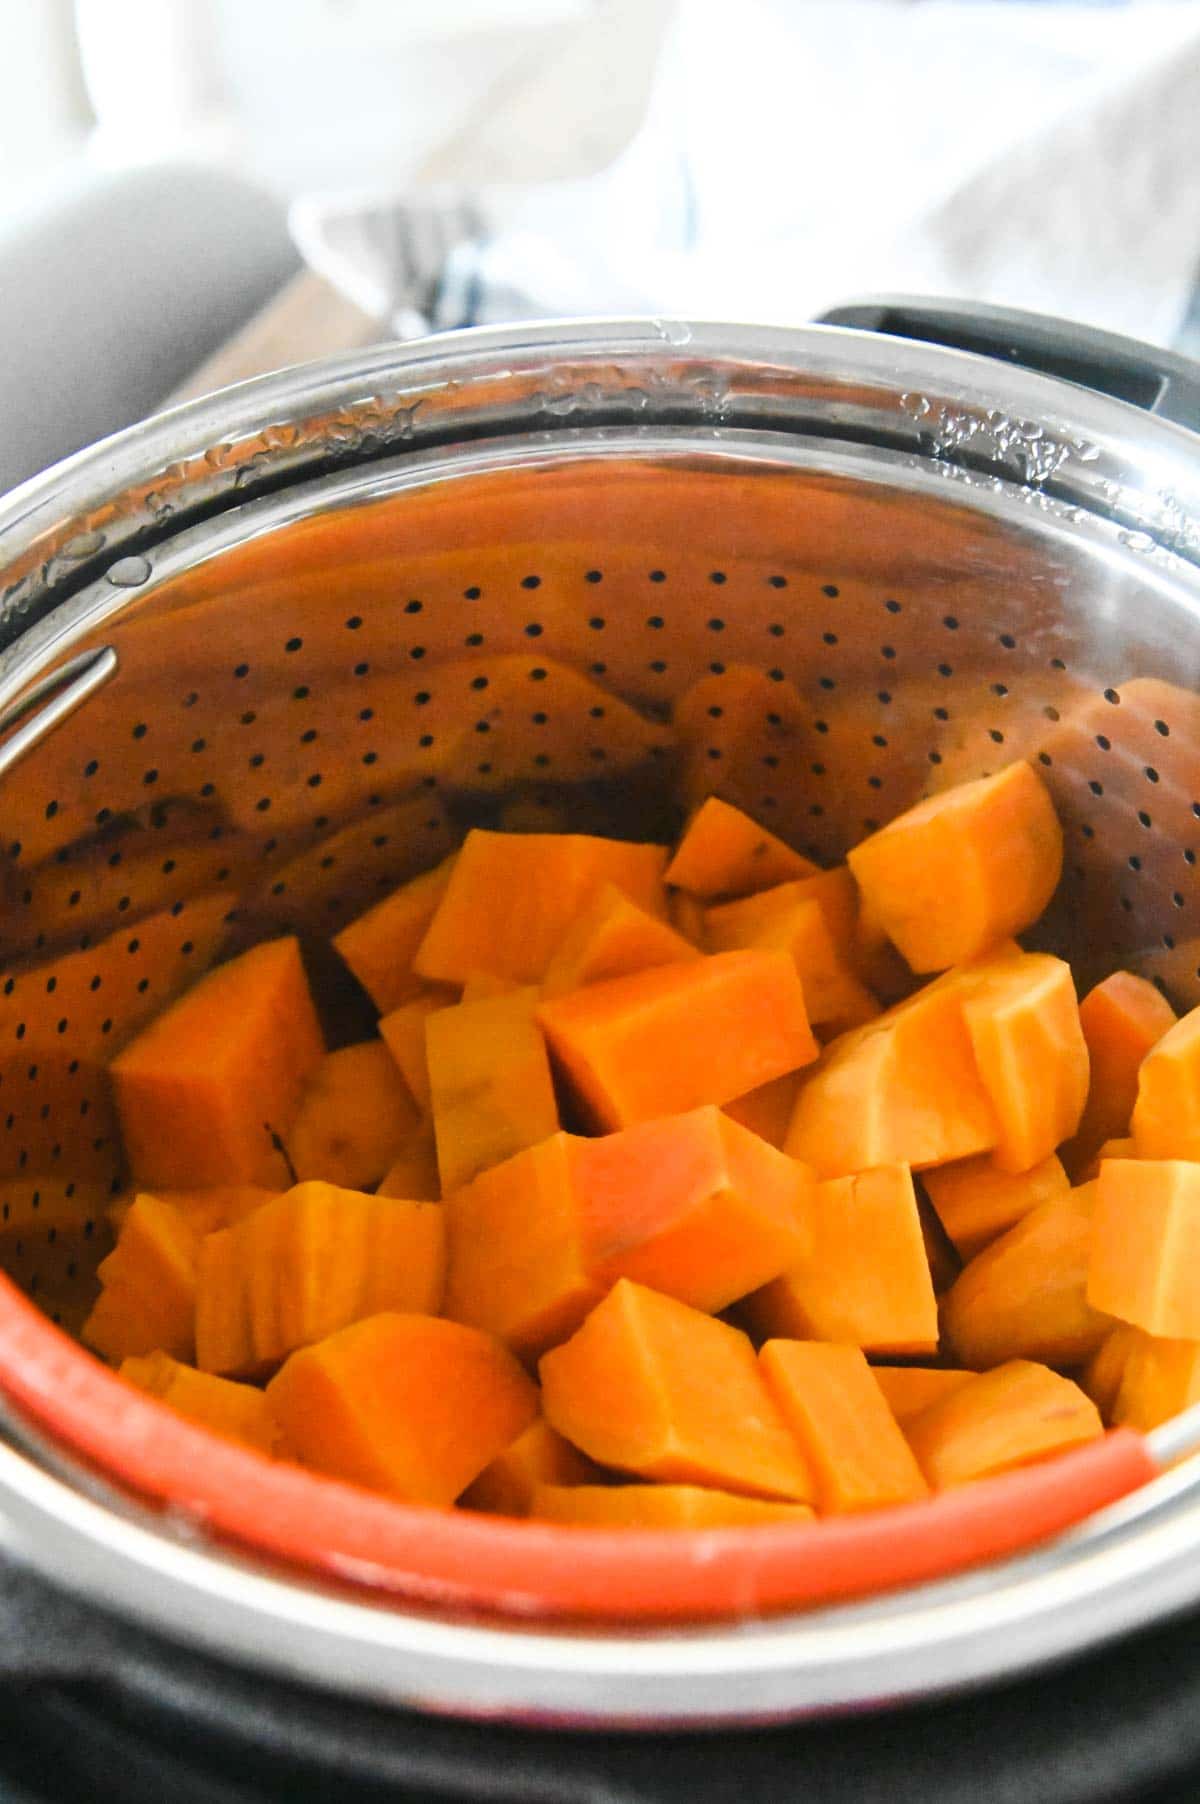 Cooked diced sweet potatoes in a steamer basket